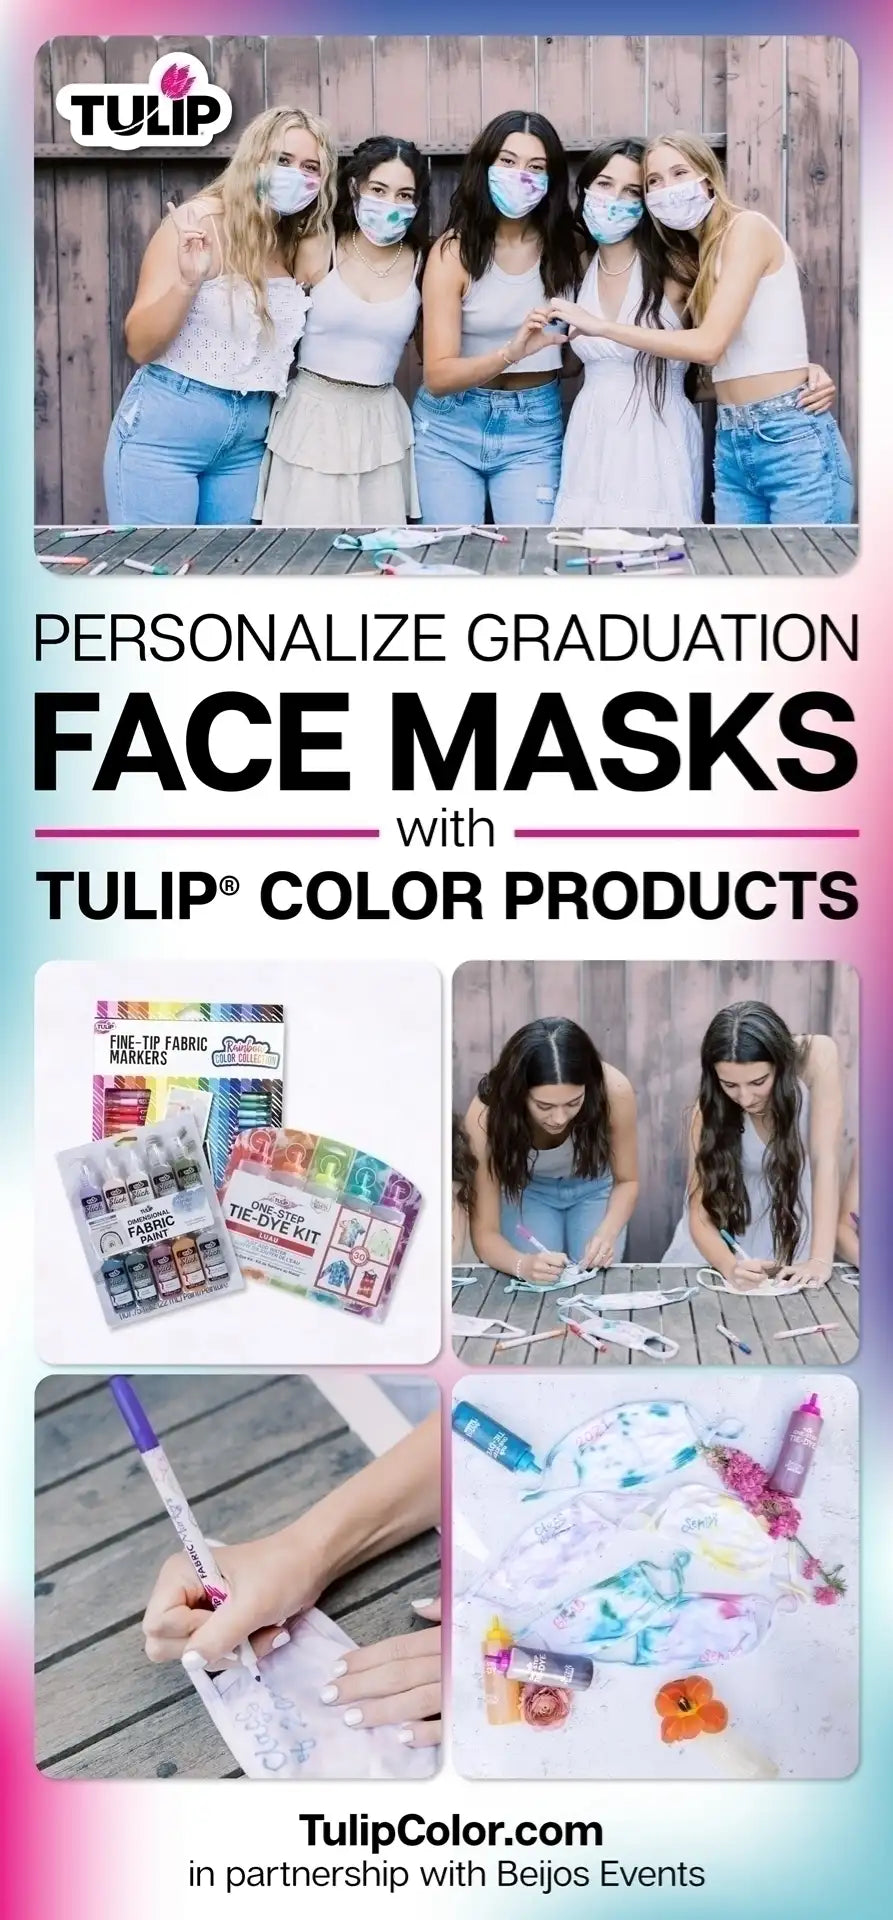 Celebrate Your Grad with Tulip Color Products